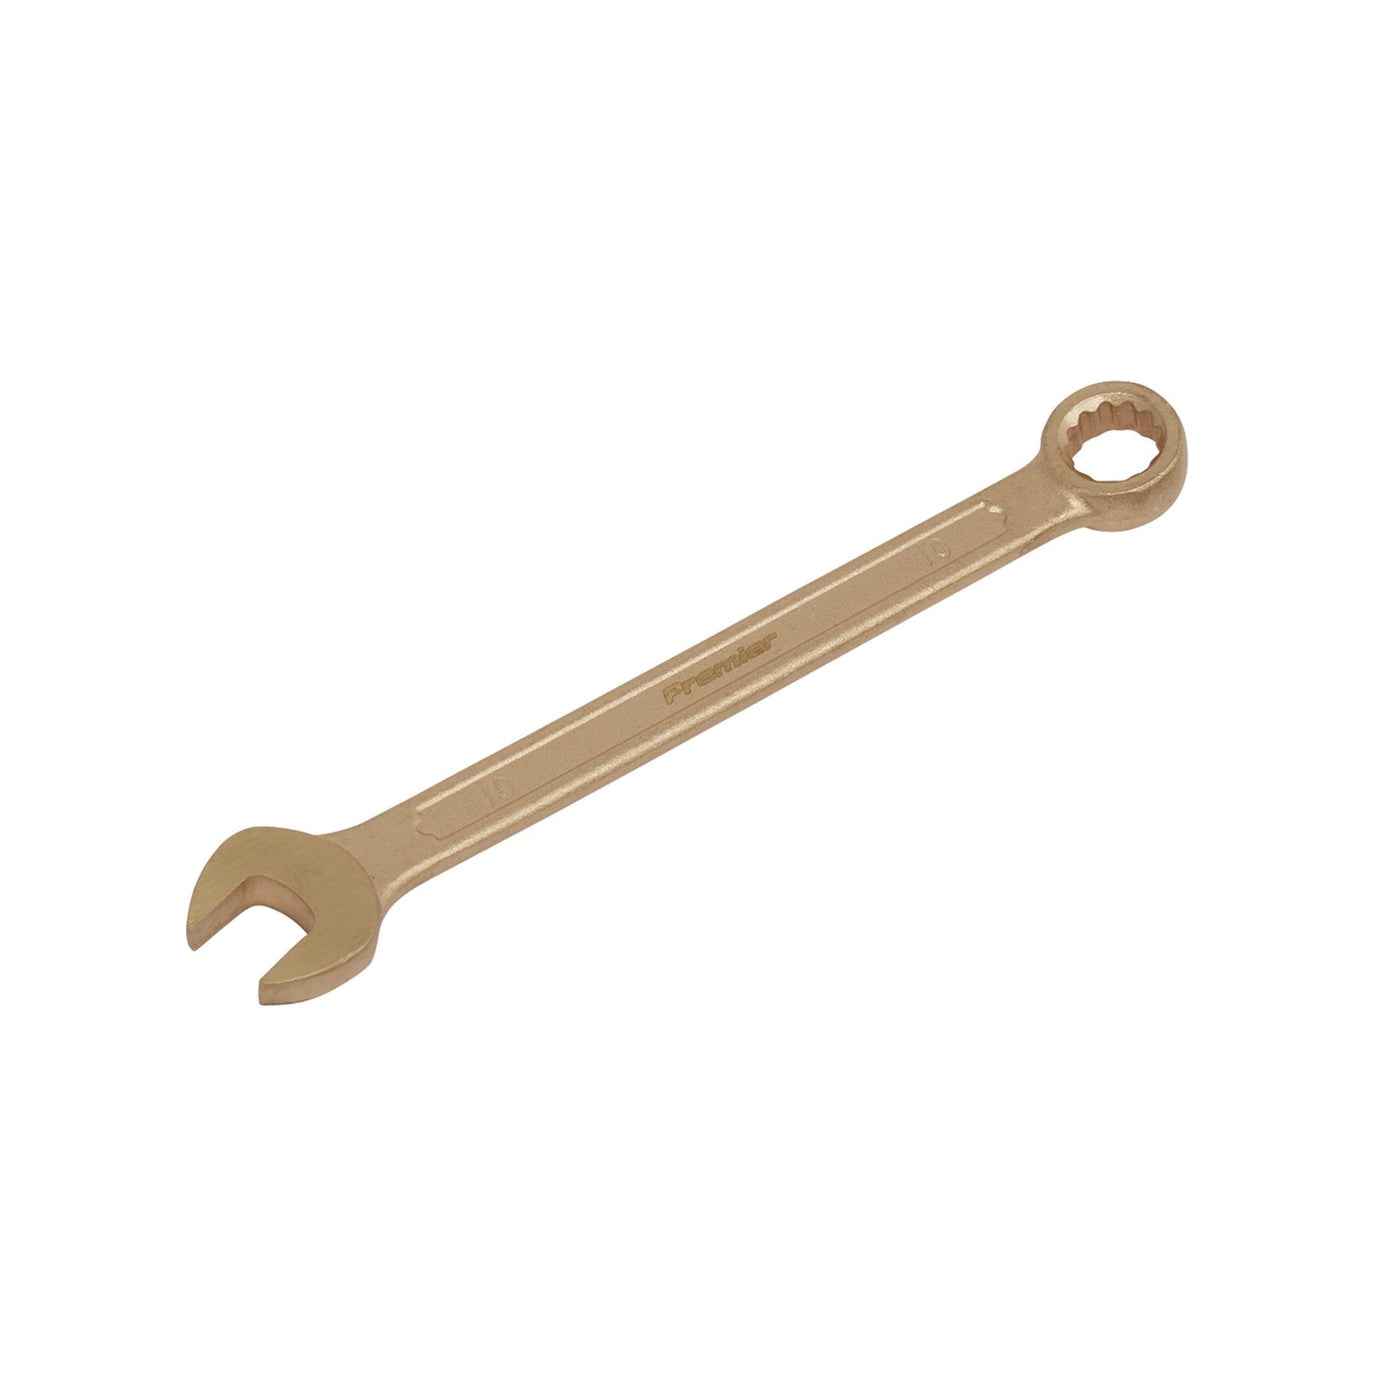 Sealey Combination Spanner 10mm - Non-Sparking